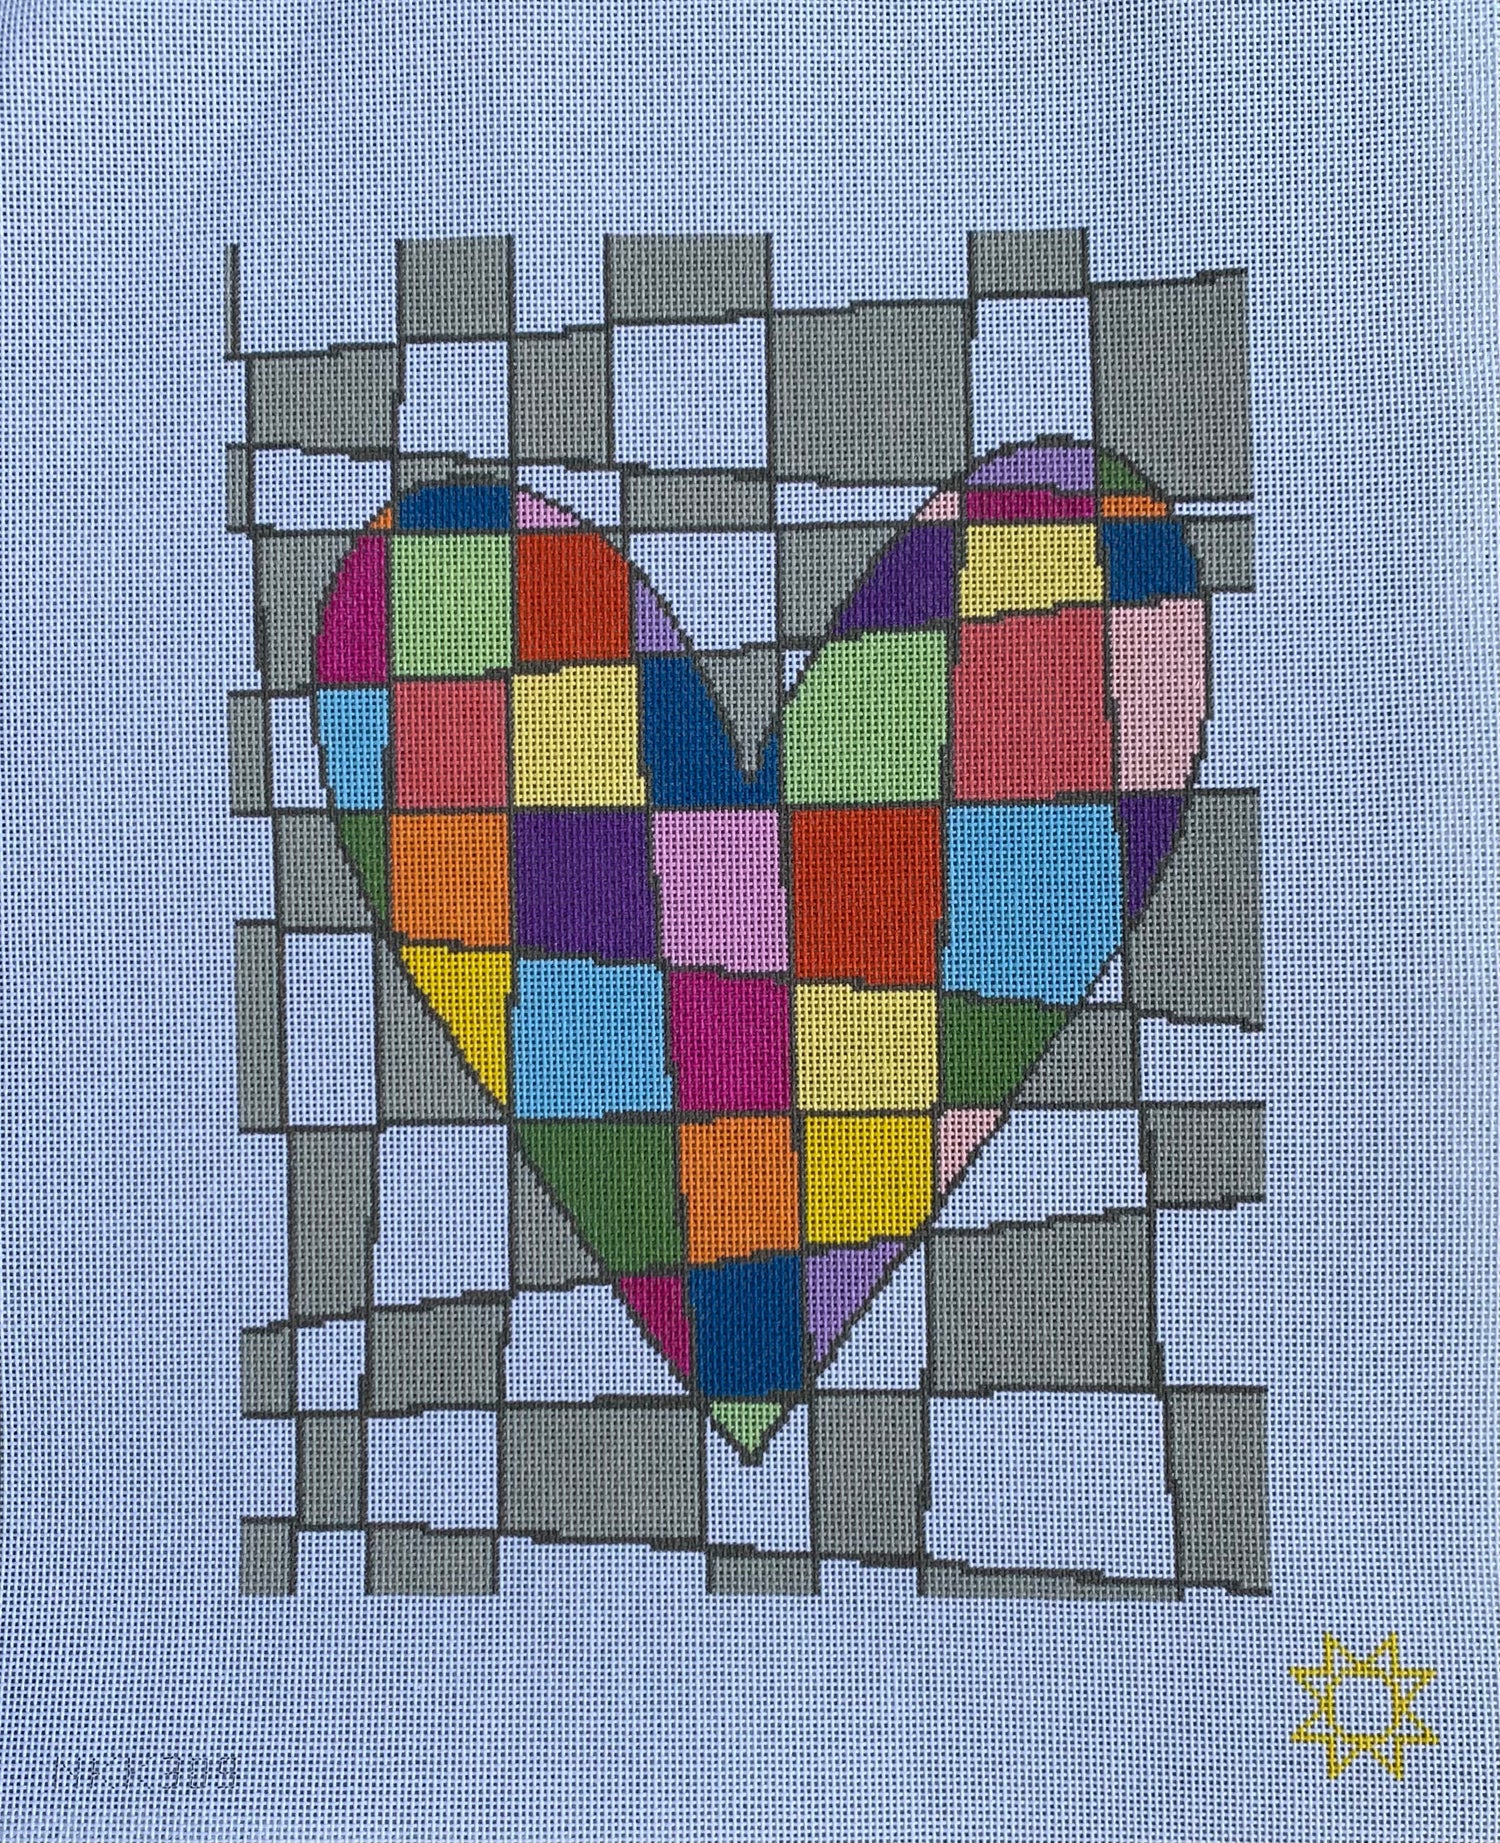 Hearts and Squares